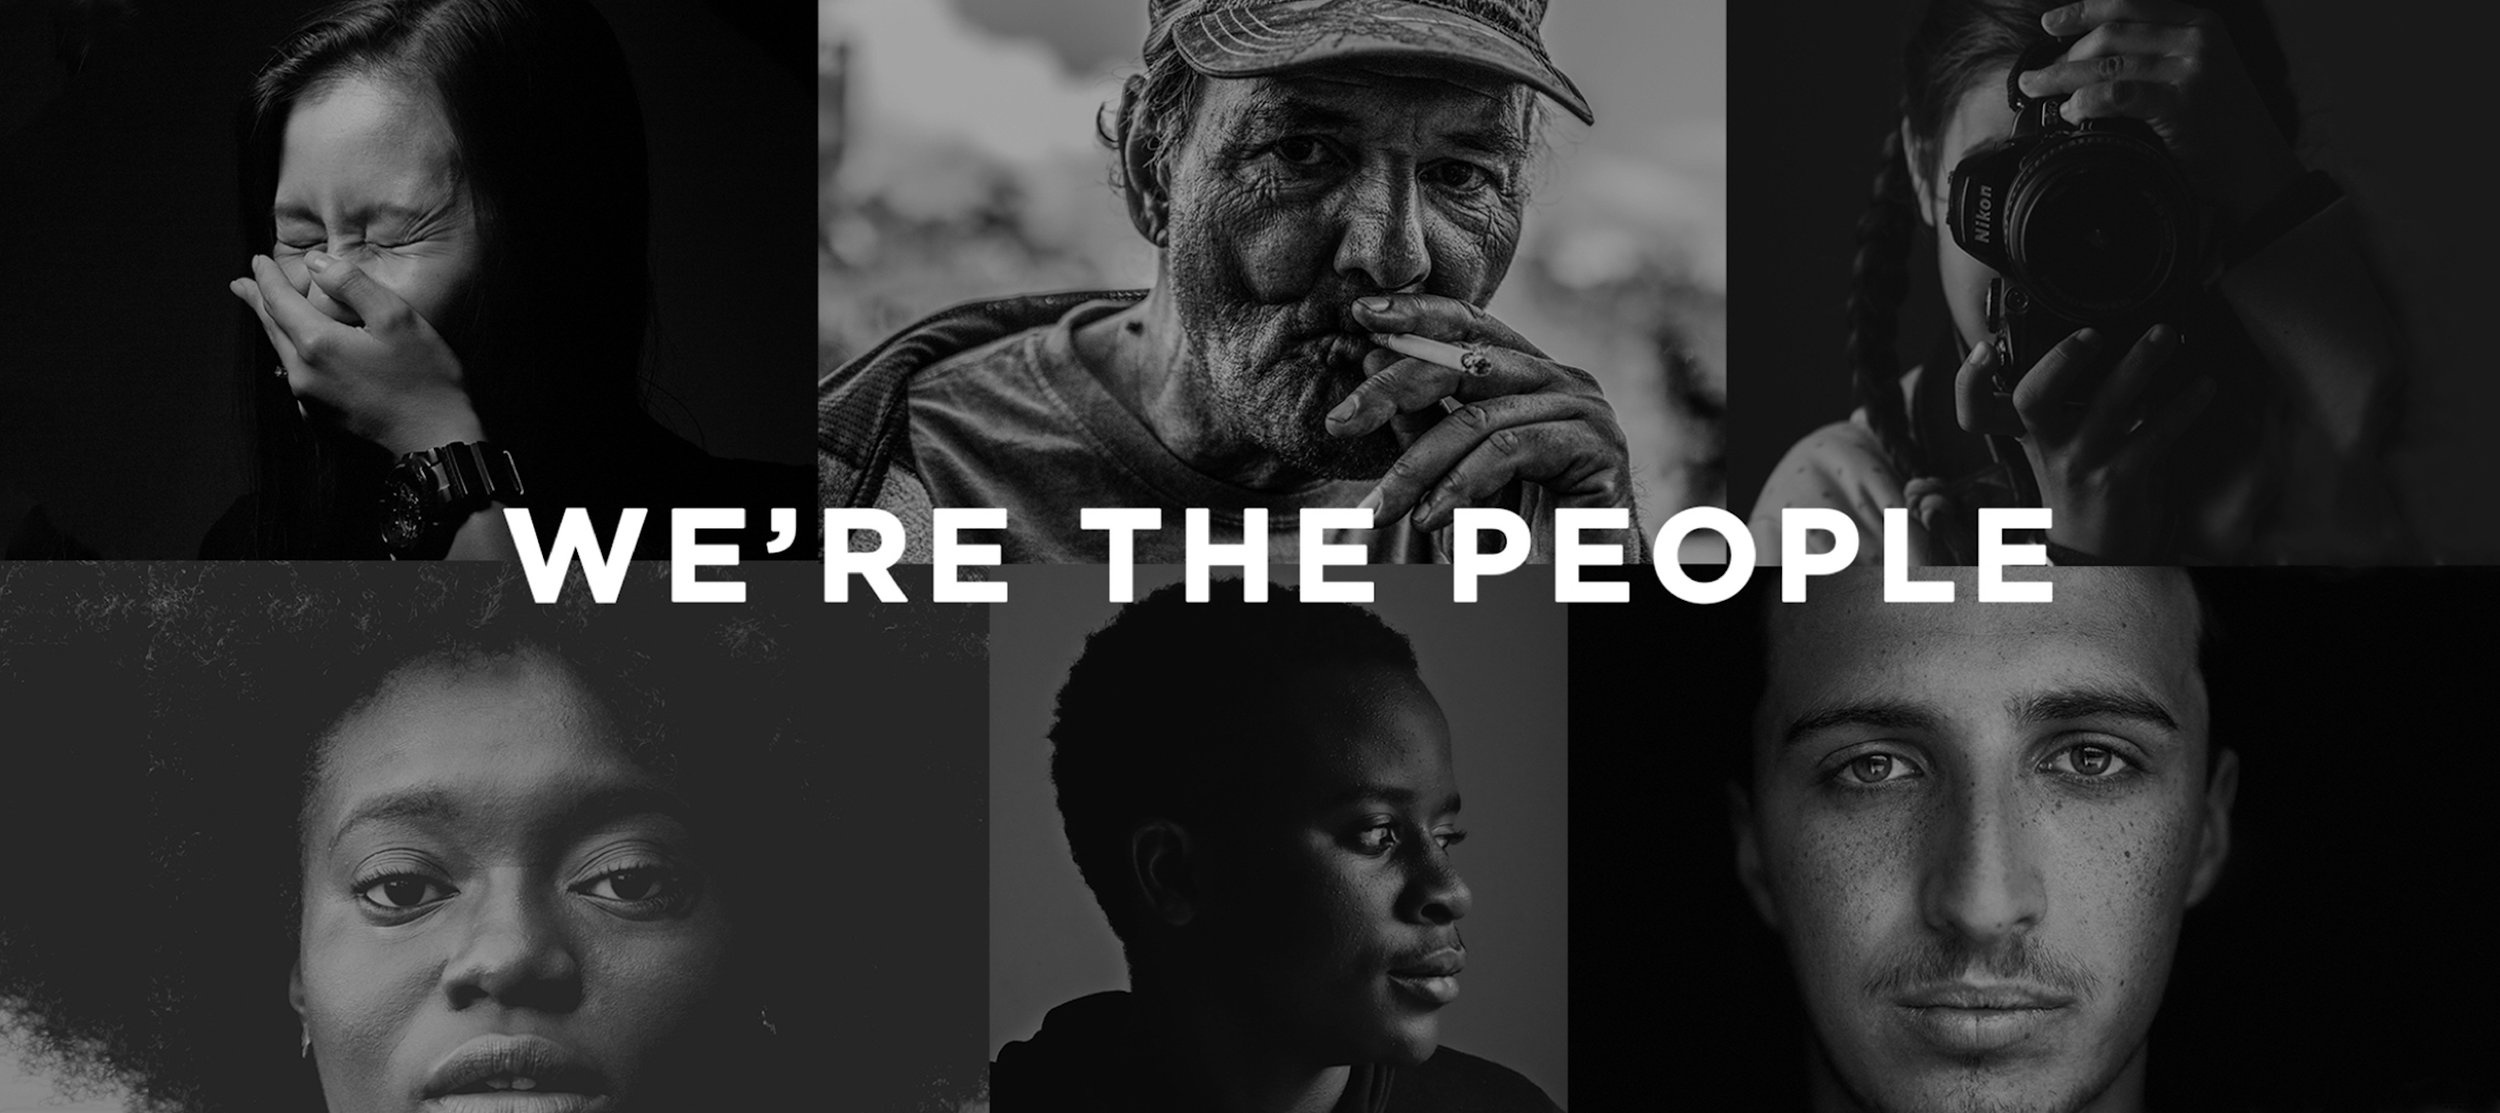 We're The People Youtube Cover Photo.jpg